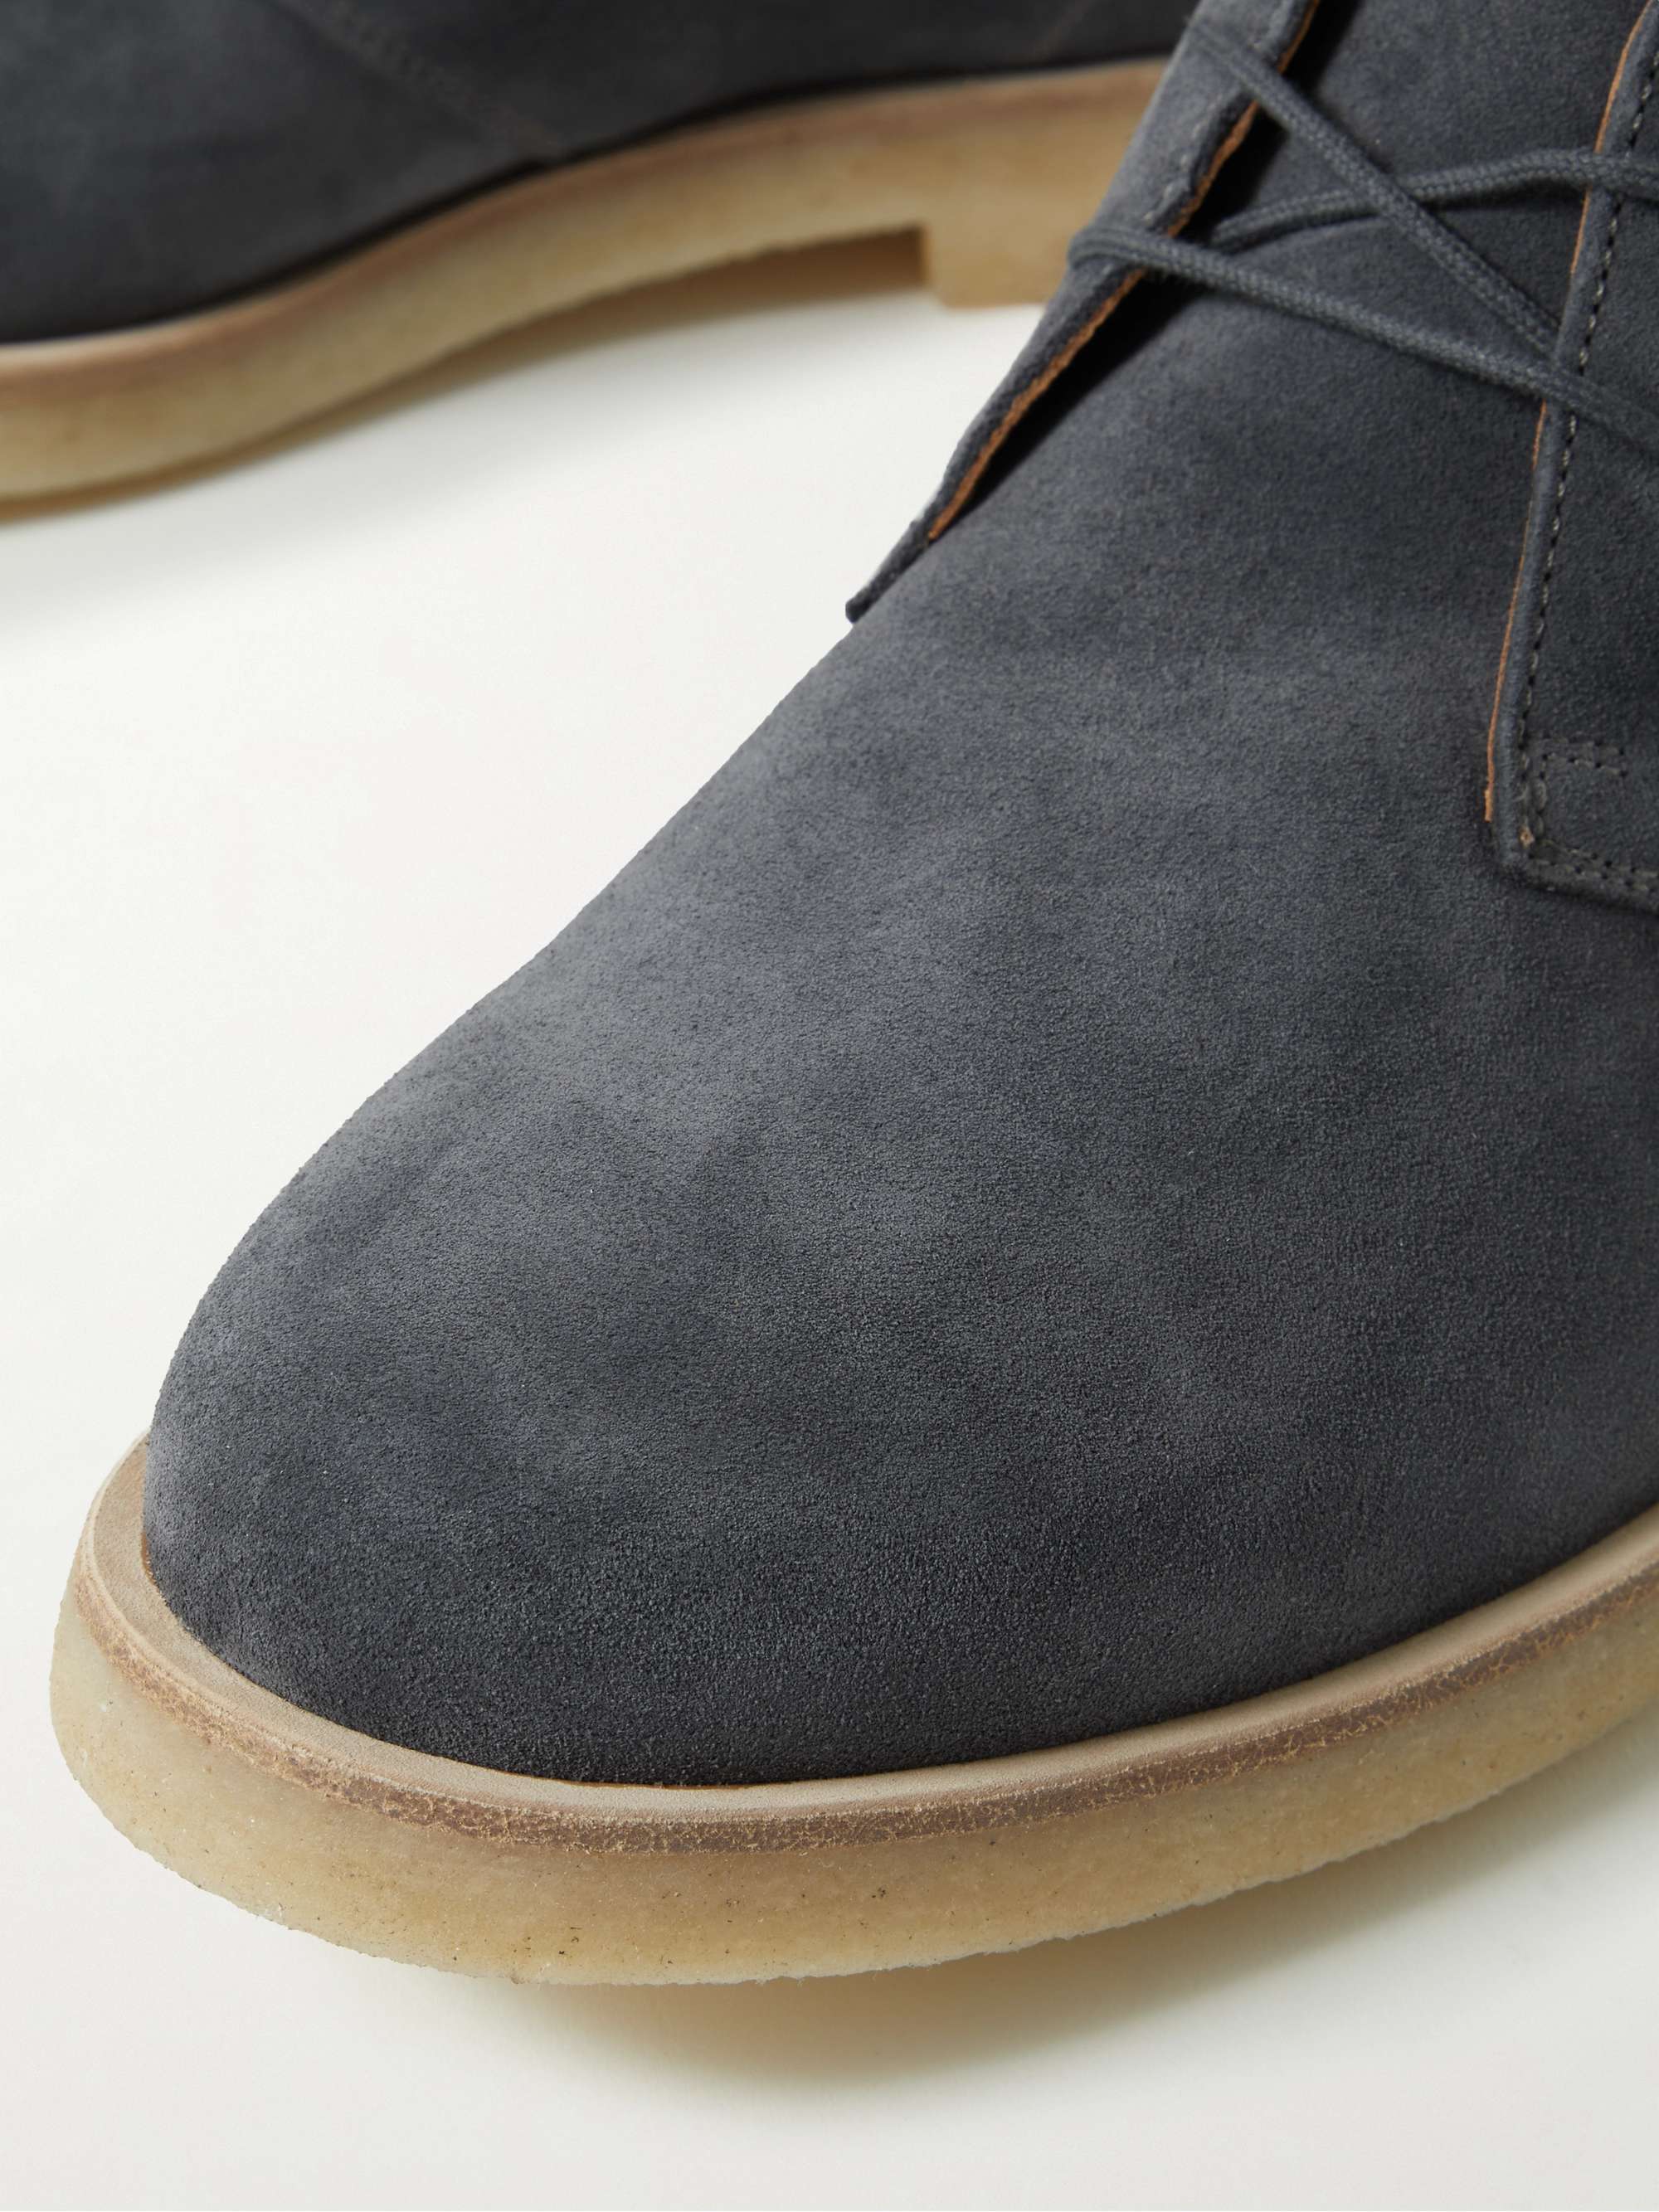 COMMON PROJECTS Suede Chukka Boots